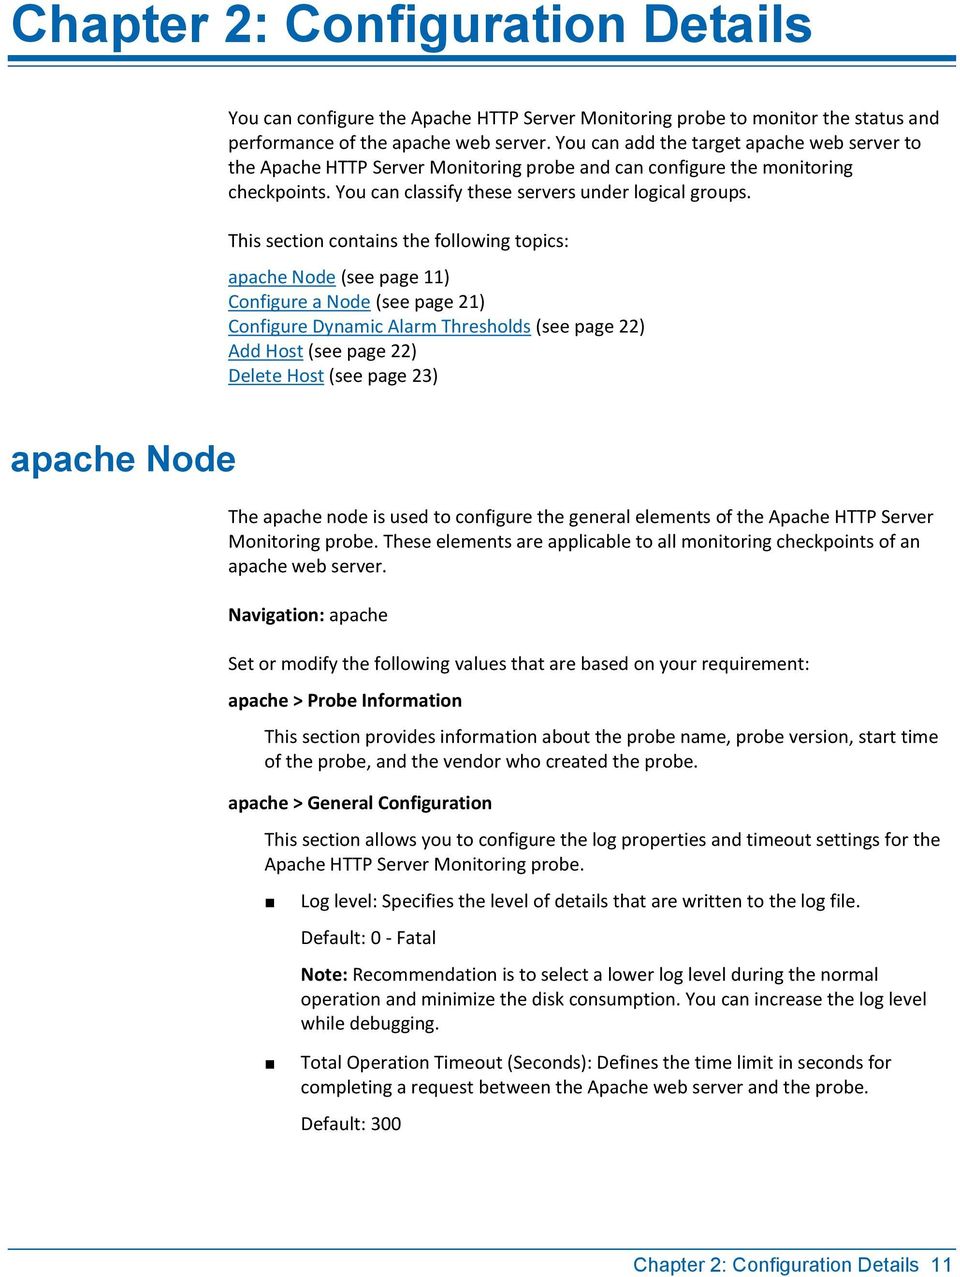 This section contains the following topics: apache Node (see page 11) Configure a Node (see page 21) Configure Dynamic Alarm Thresholds (see page 22) Add Host (see page 22) Delete Host (see page 23)